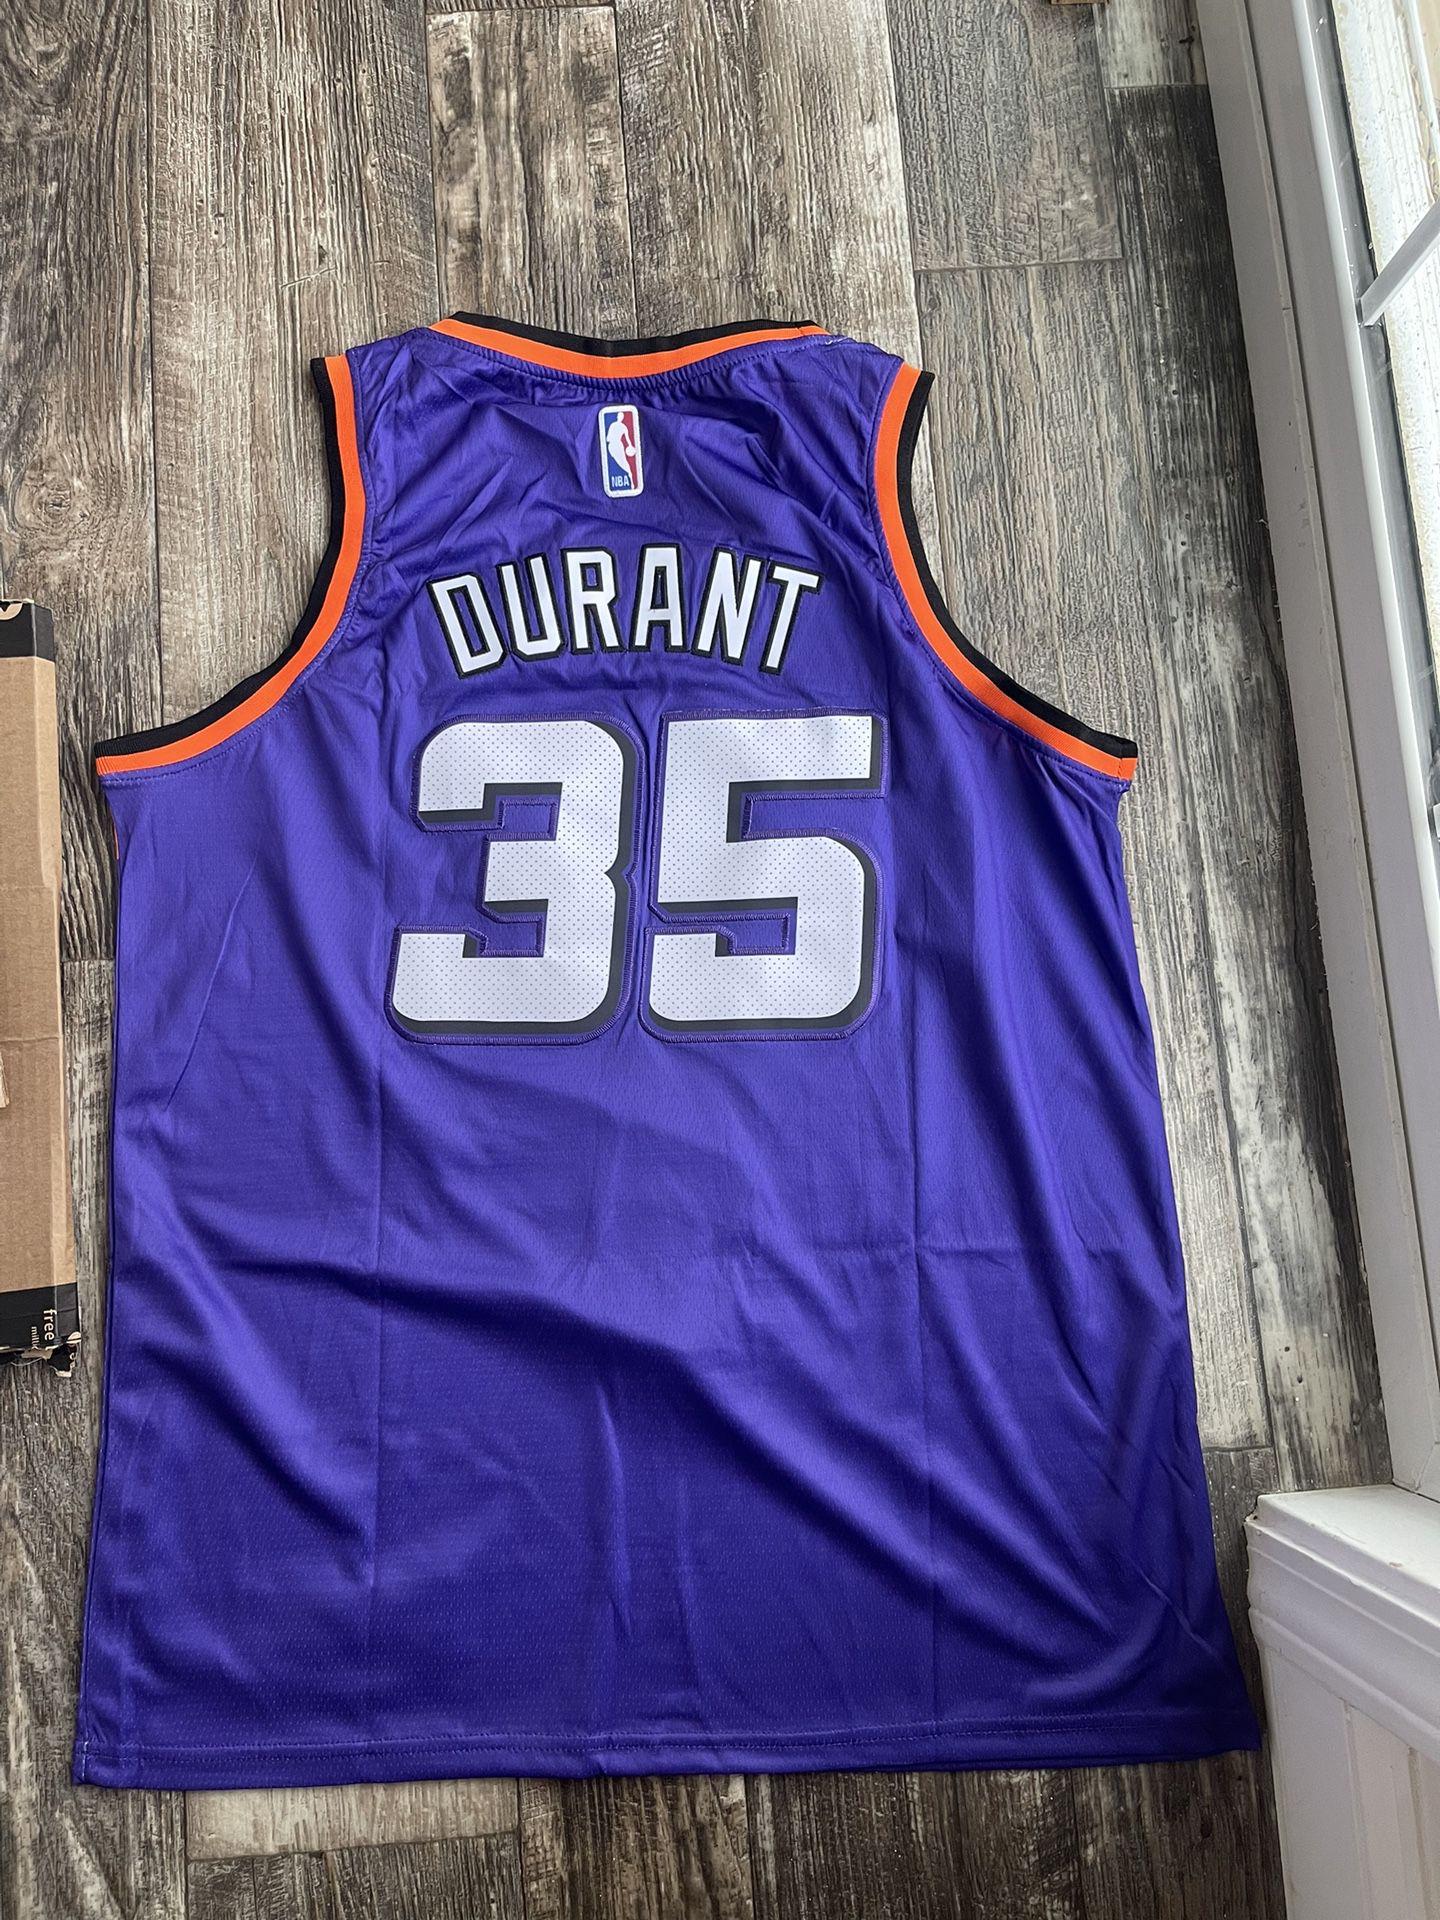 Kevin Durant (ALL SIZES) Phoenix Suns Throwback Jersey for Sale